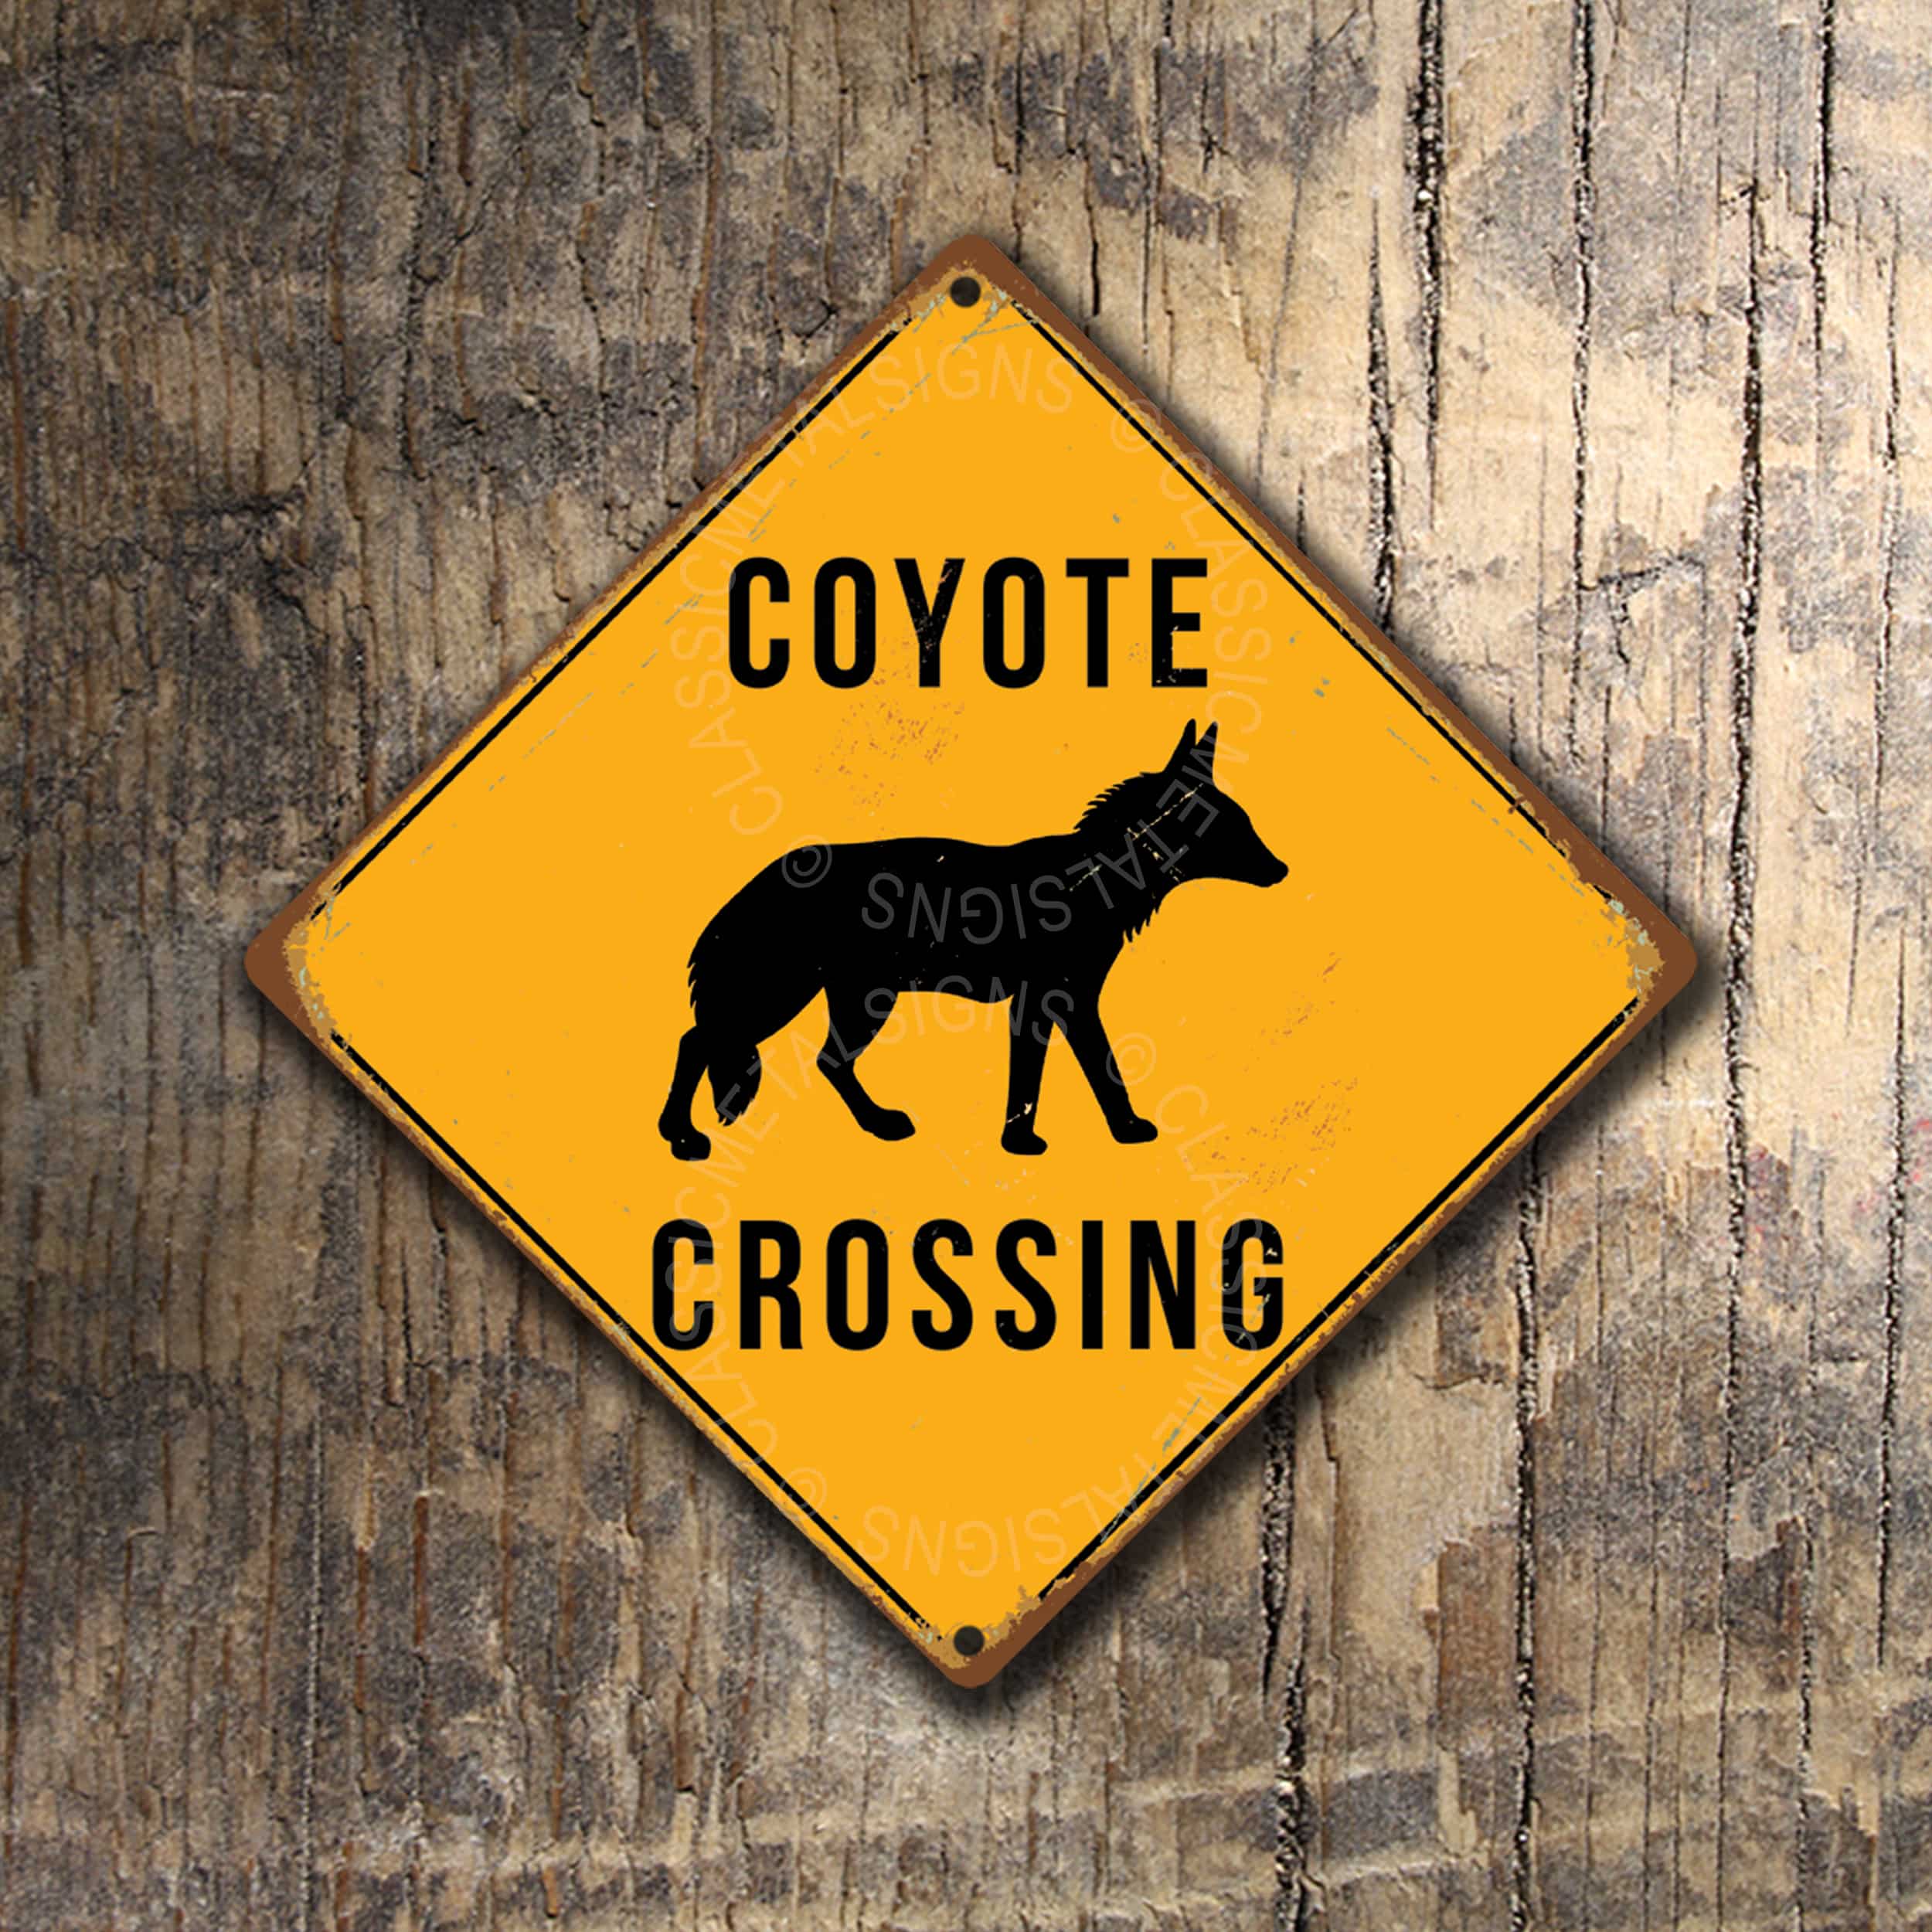 Coyote Crossing Signs